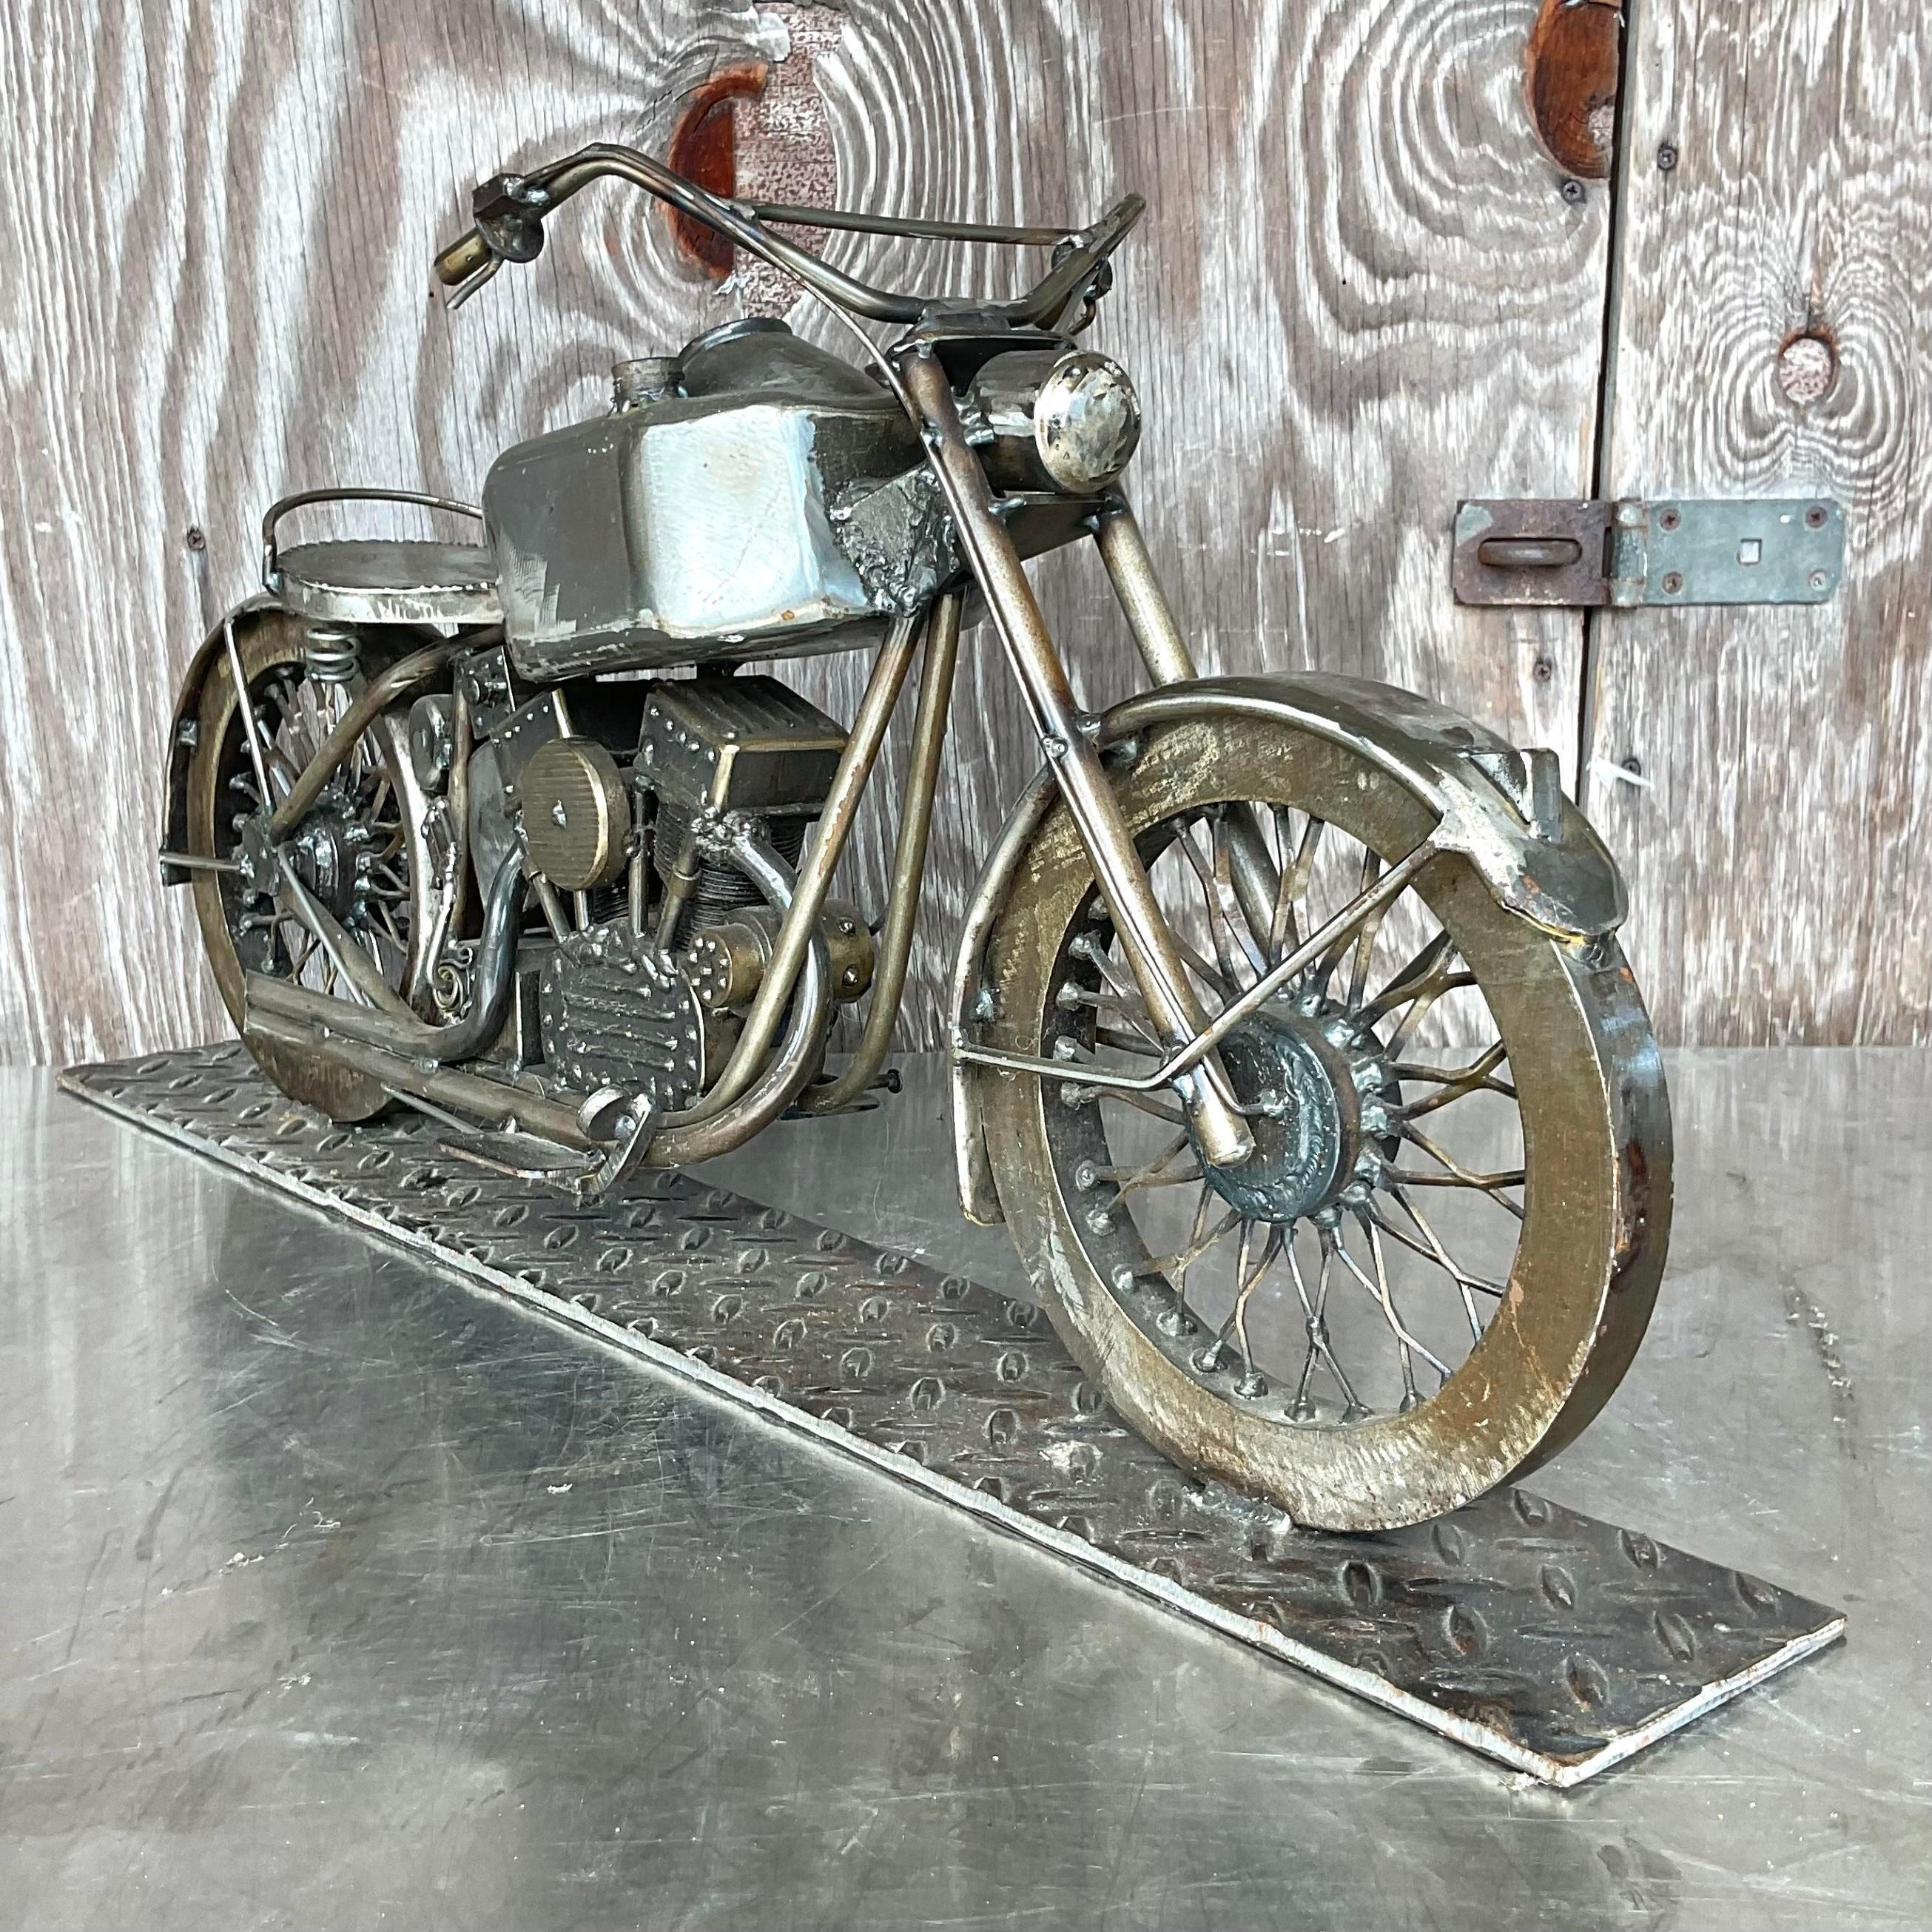 A fabulous vintage Boho motorcycle sculpture. A chic hand crafted brushed stainless steel with incredible attention to detail. Signed on the license plate. Large and impressive. Acquired from a palm Beach estate.